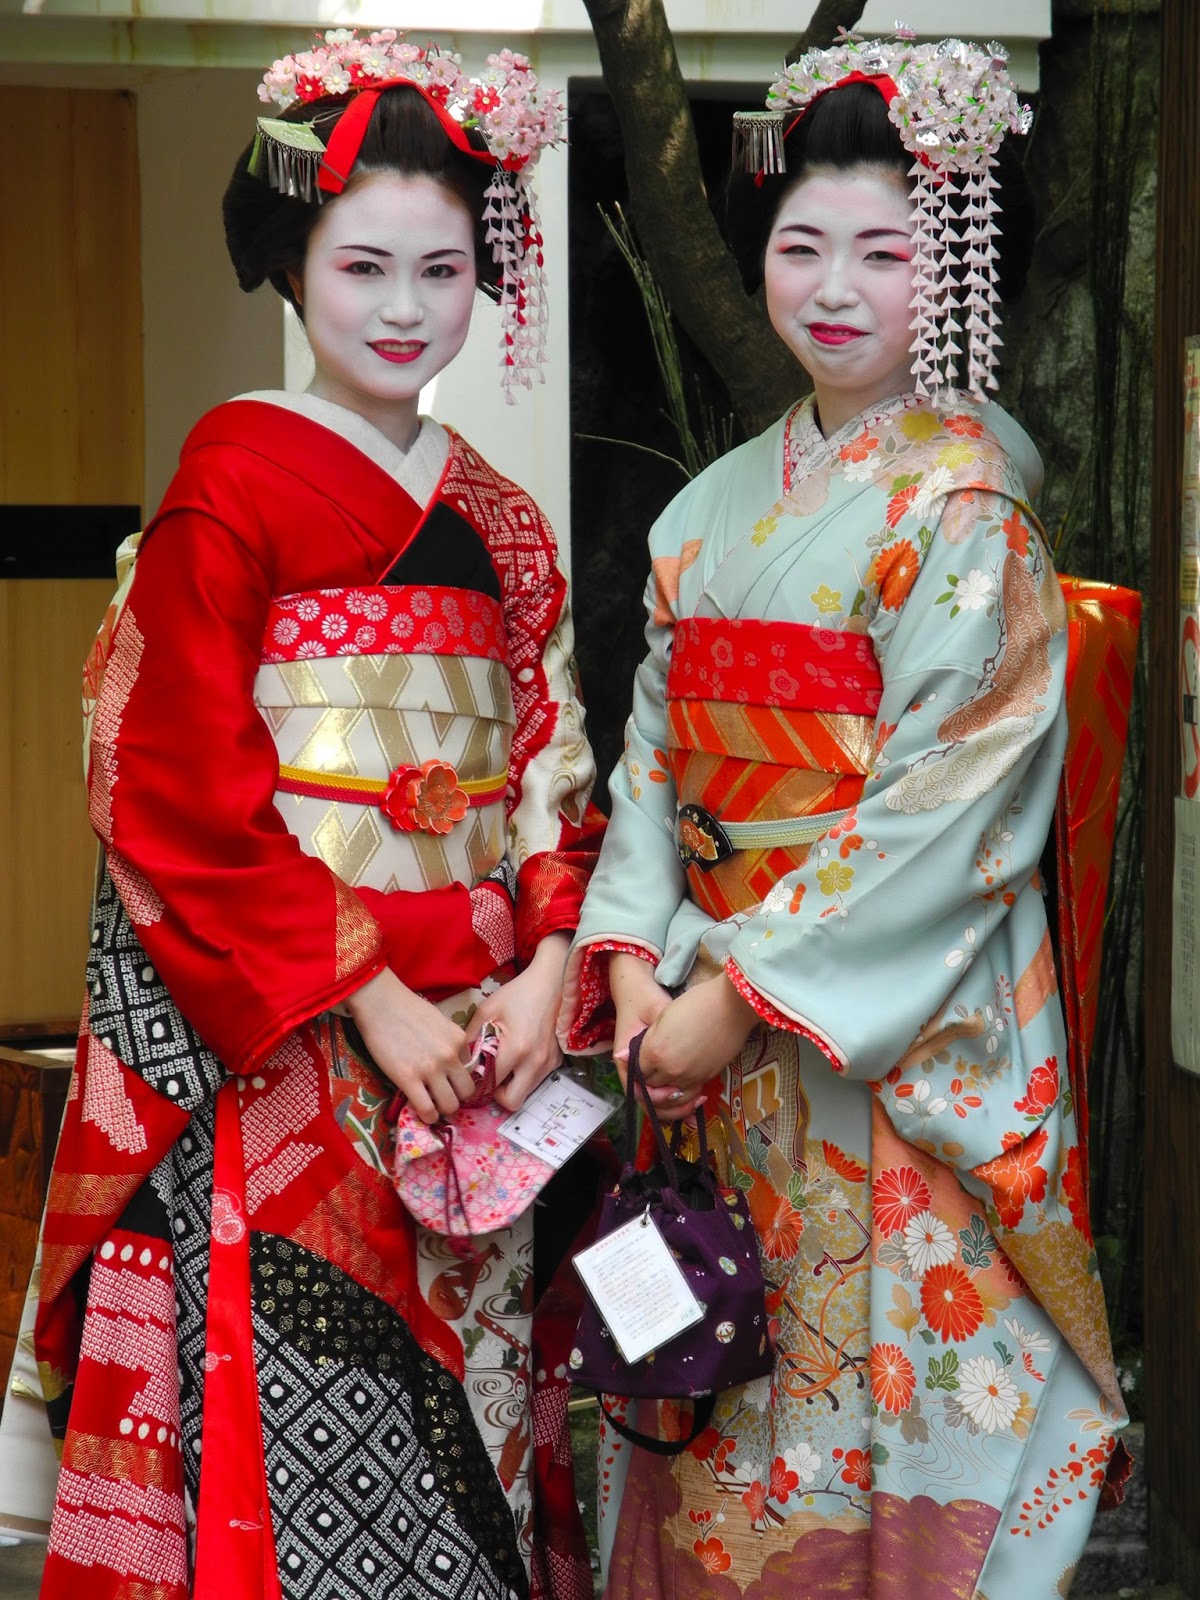 CAMIRTW: Japanese People in Traditional Clothes